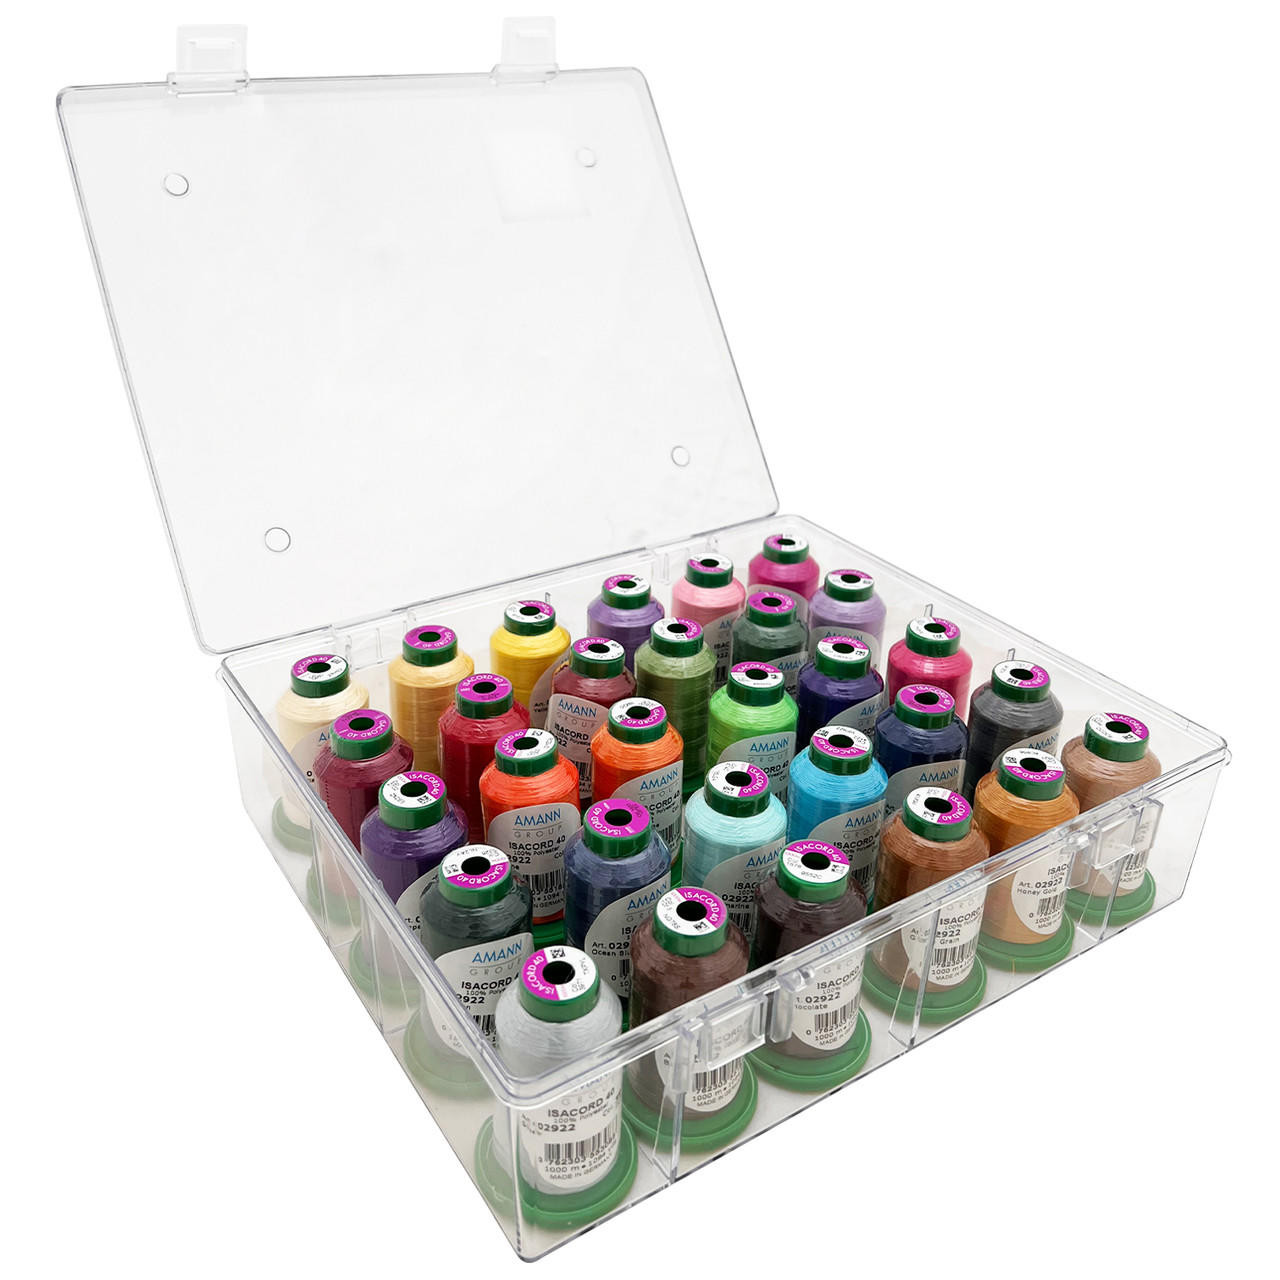 Isacord Gift Box Assortment 30 Spools Quality Embroidery Thread Set